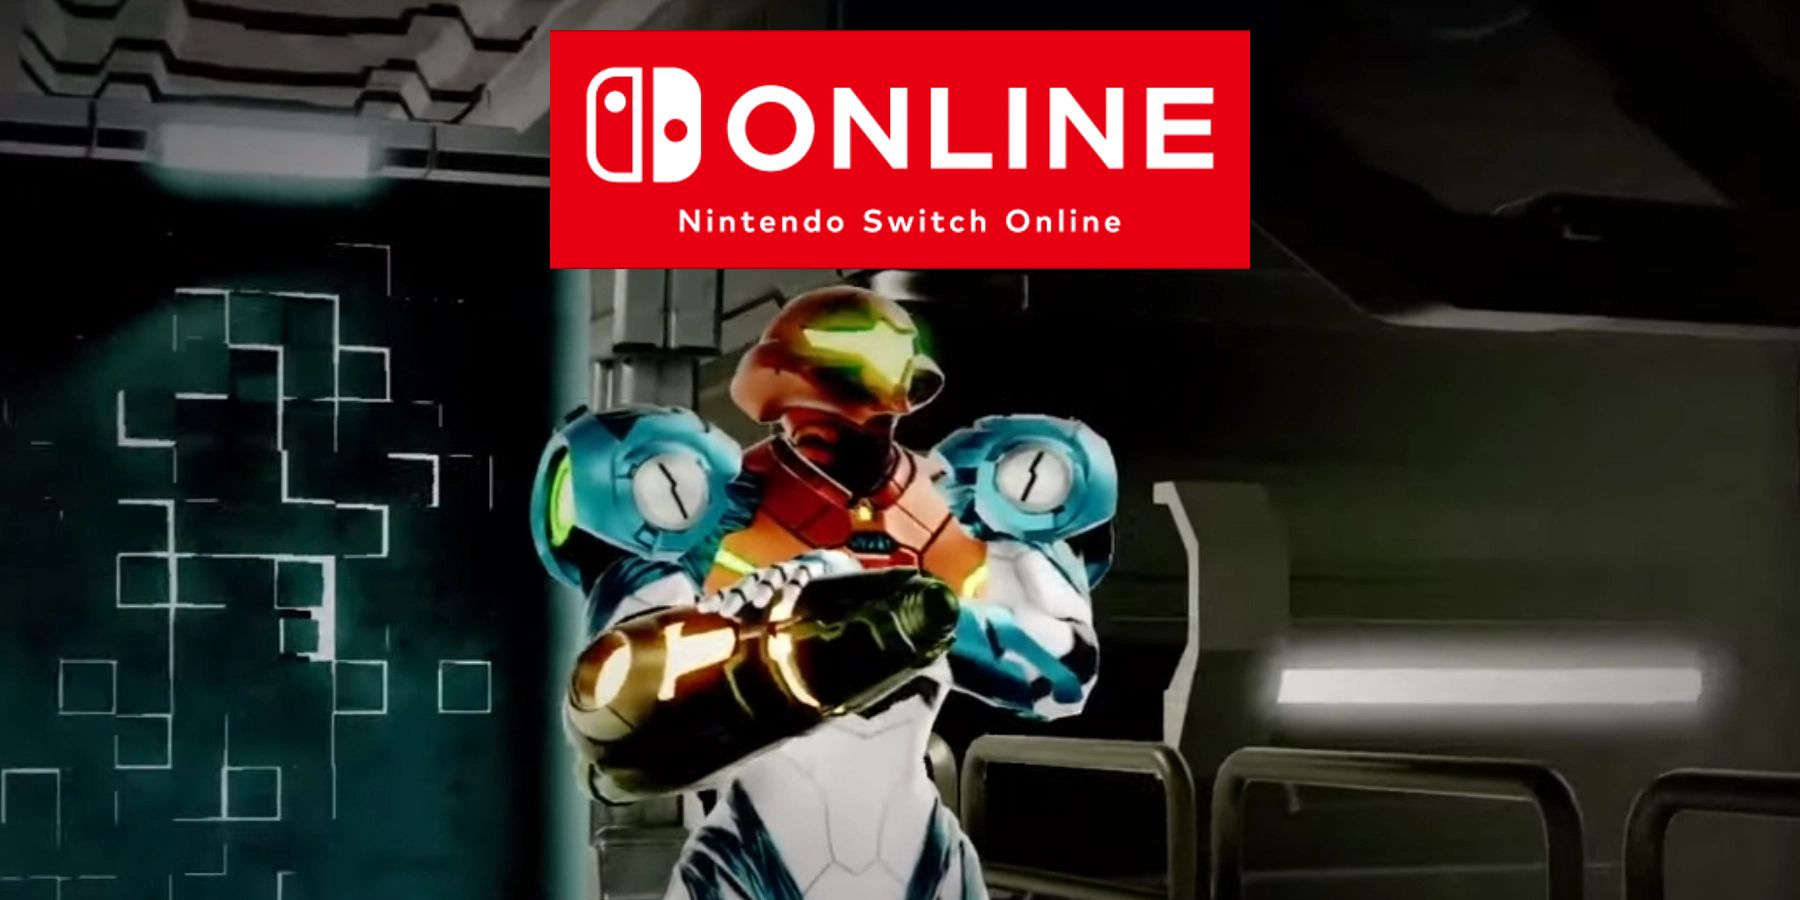 Boy Switch Game Upgrade Rumored Dread Huge for Be Online\'s Could Nintendo Metroid